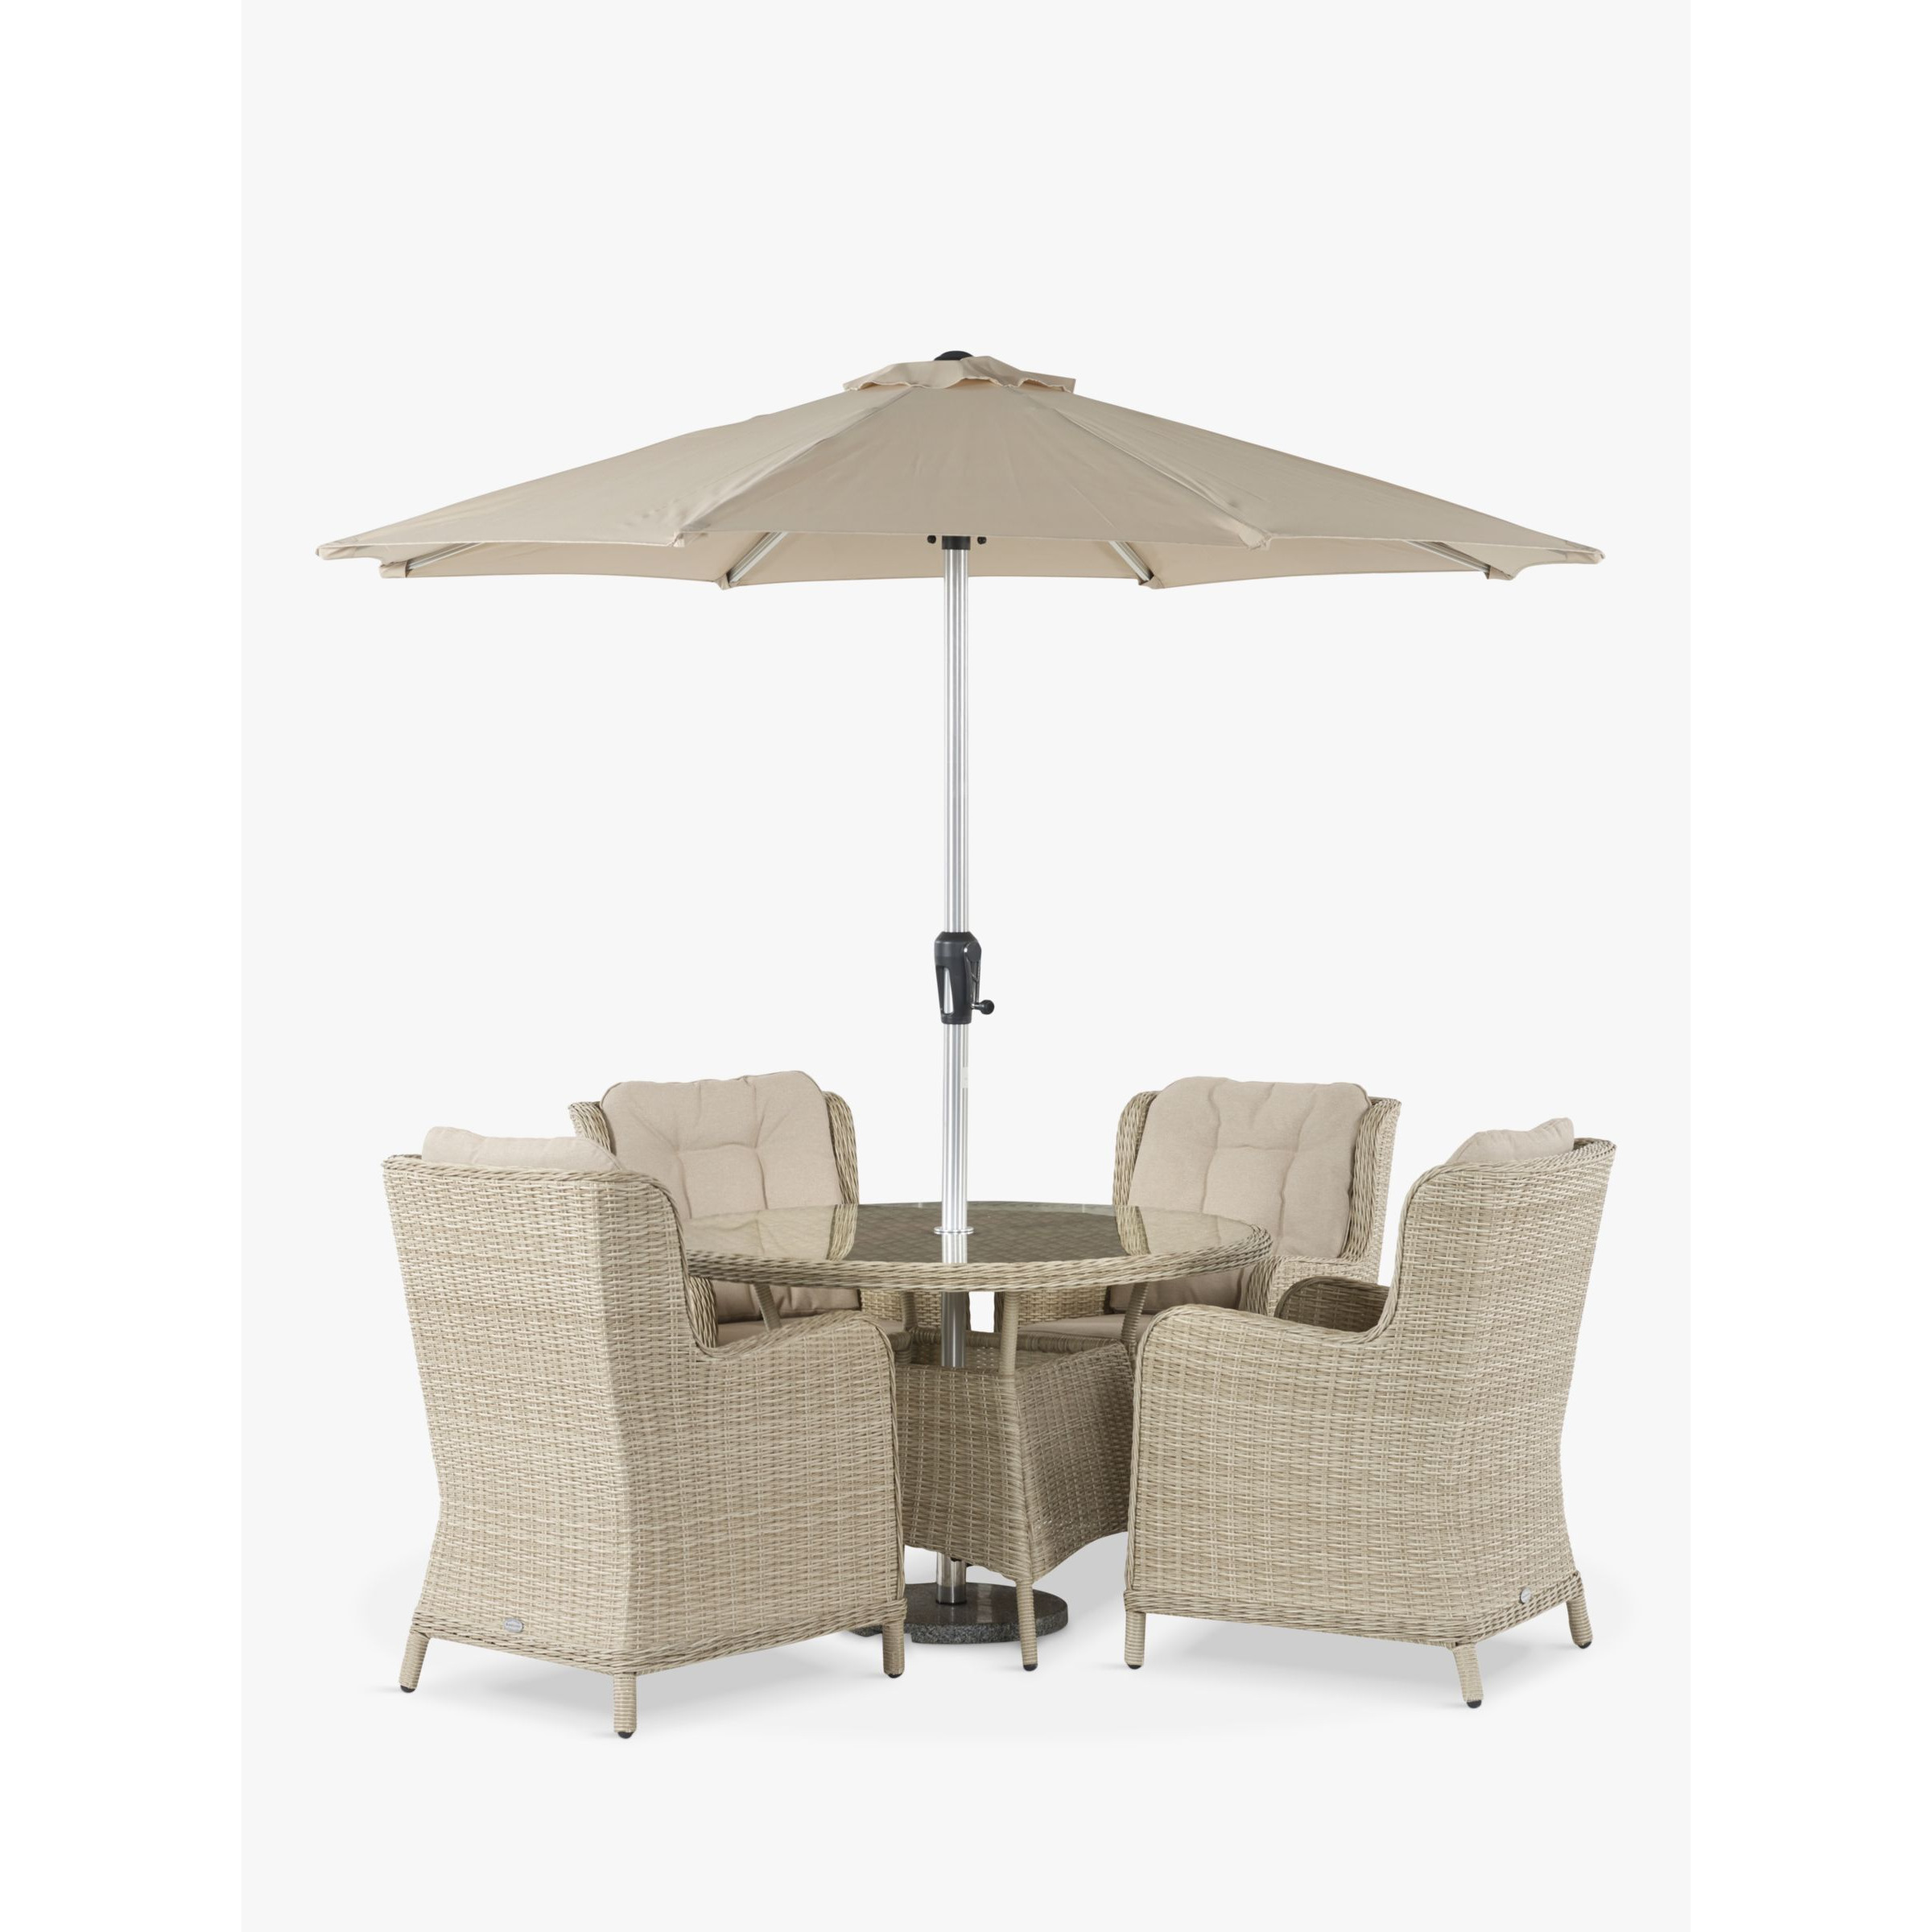 Bramblecrest Chedworth 4-Seater Garden Round Dining Table & Chairs Set with Parasol, Sandstone - image 1